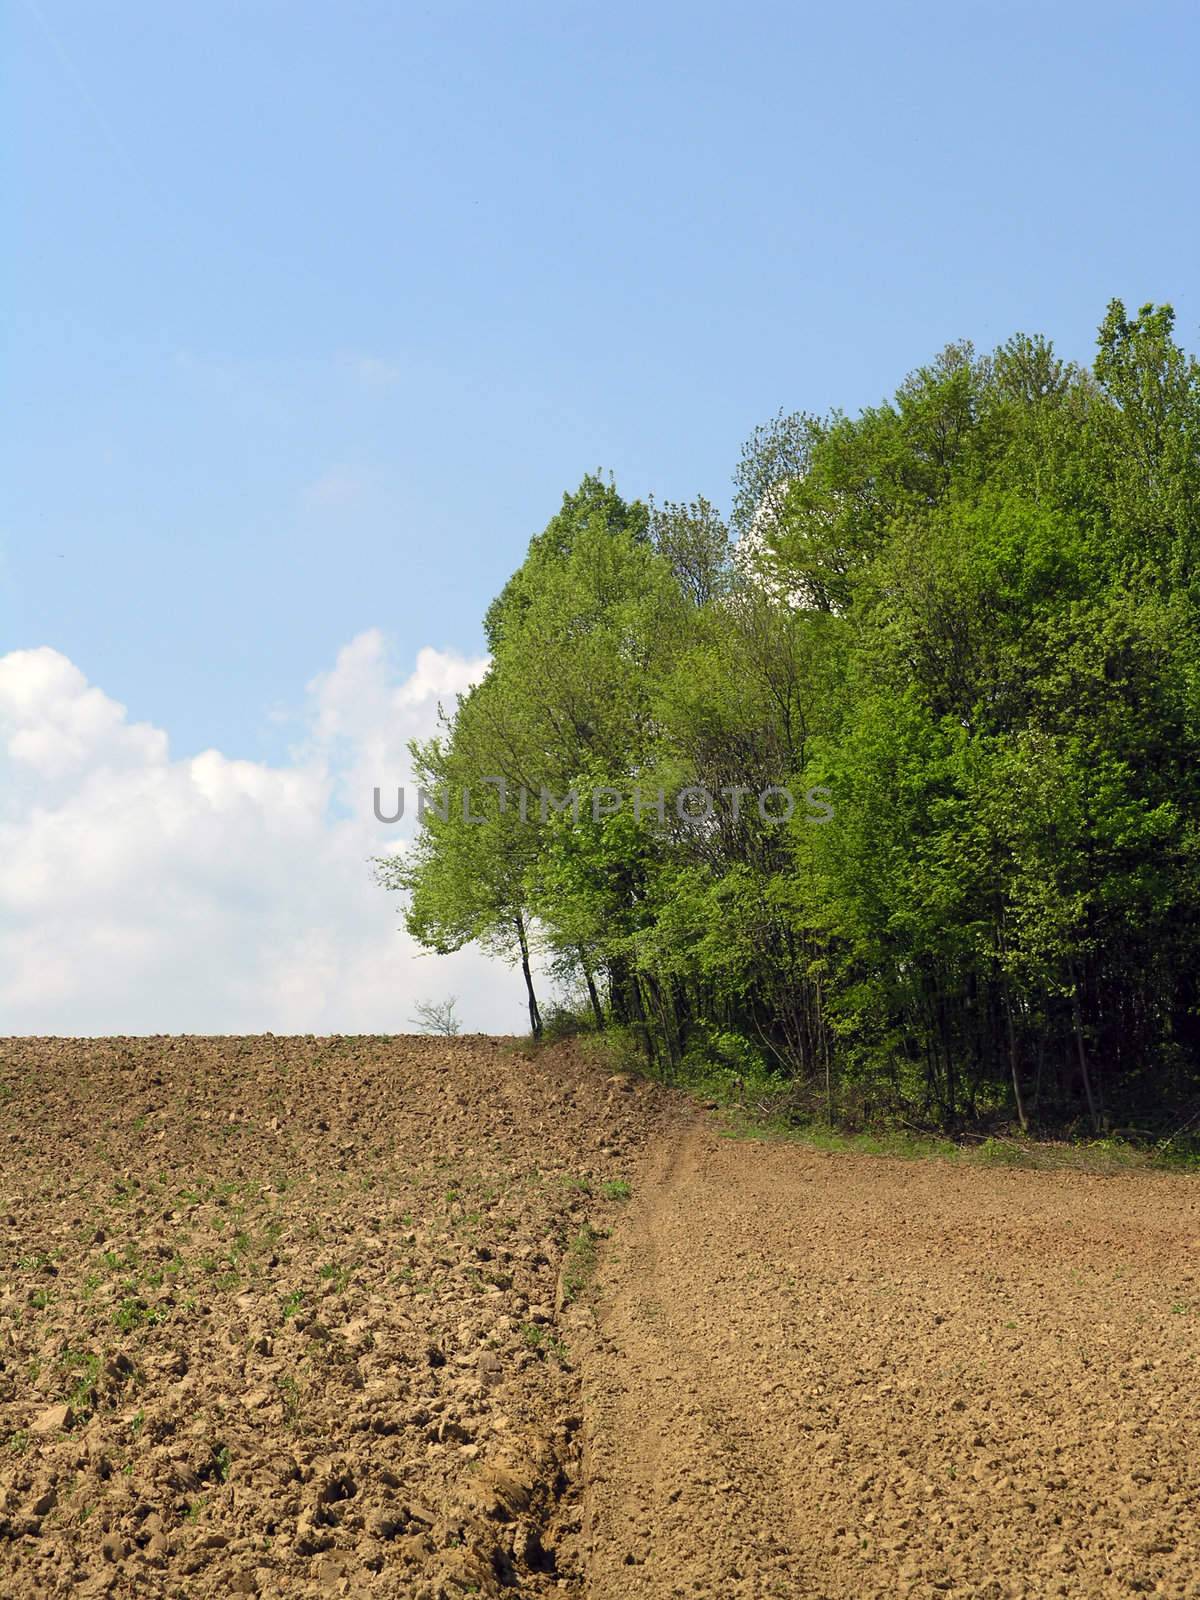 Agricultural field and blue sky